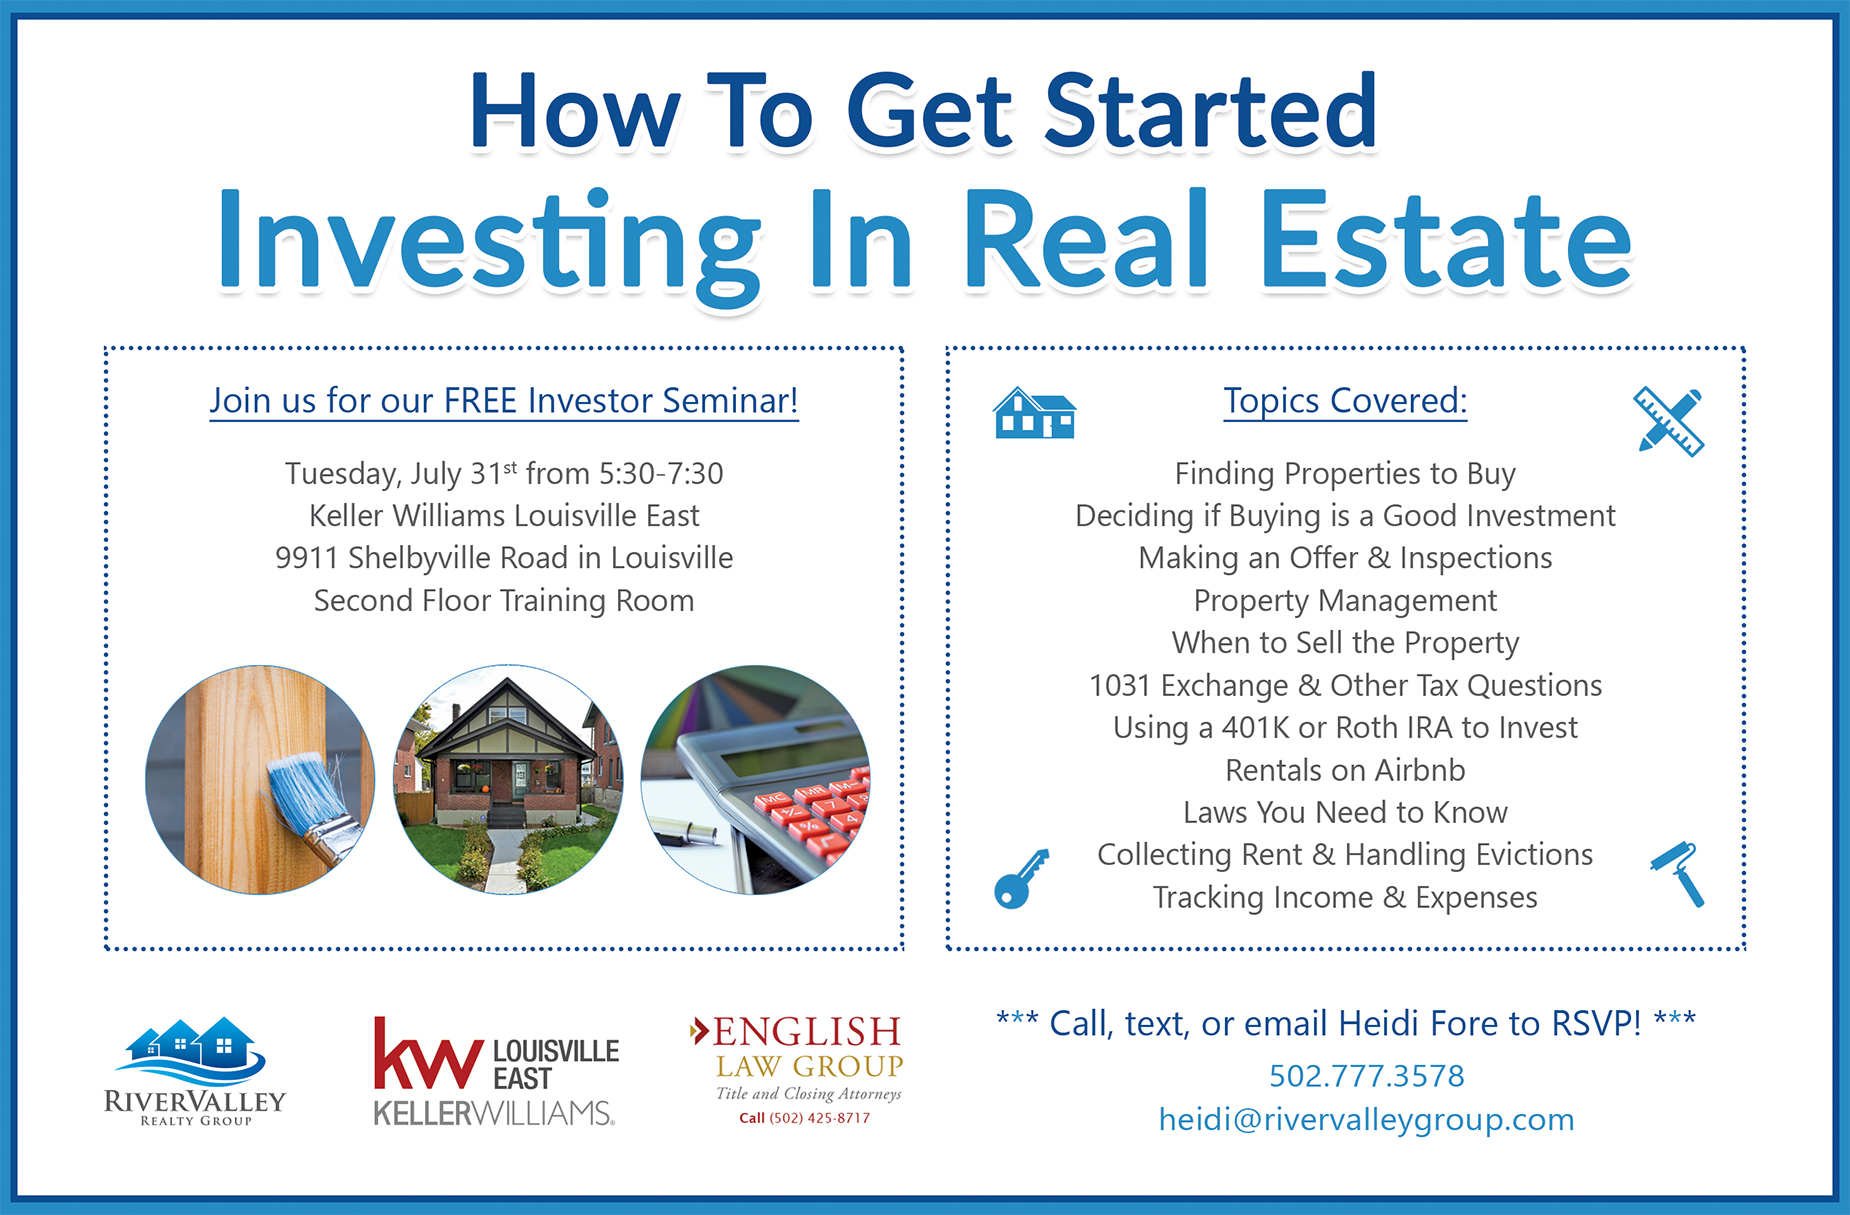 when to sell real estate investment